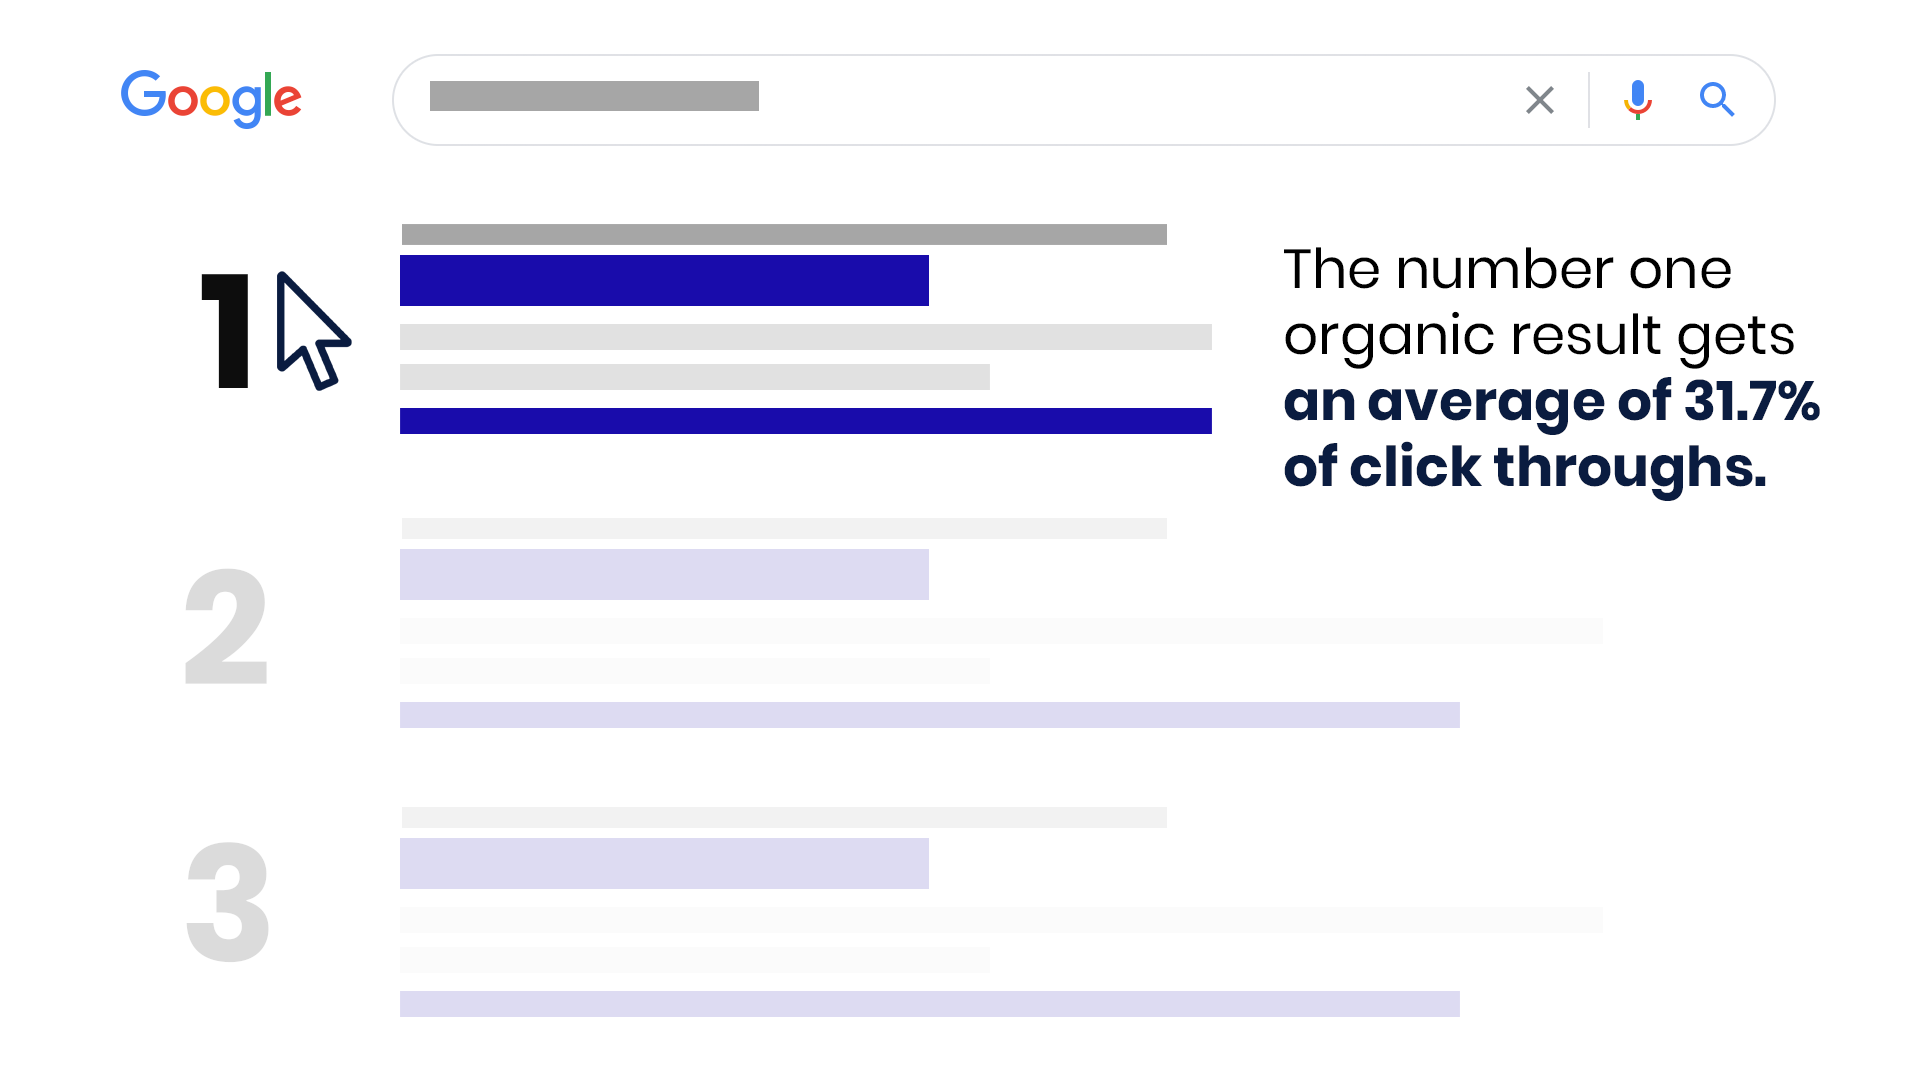 the number one organic click on Google gets over 30% of all clicks